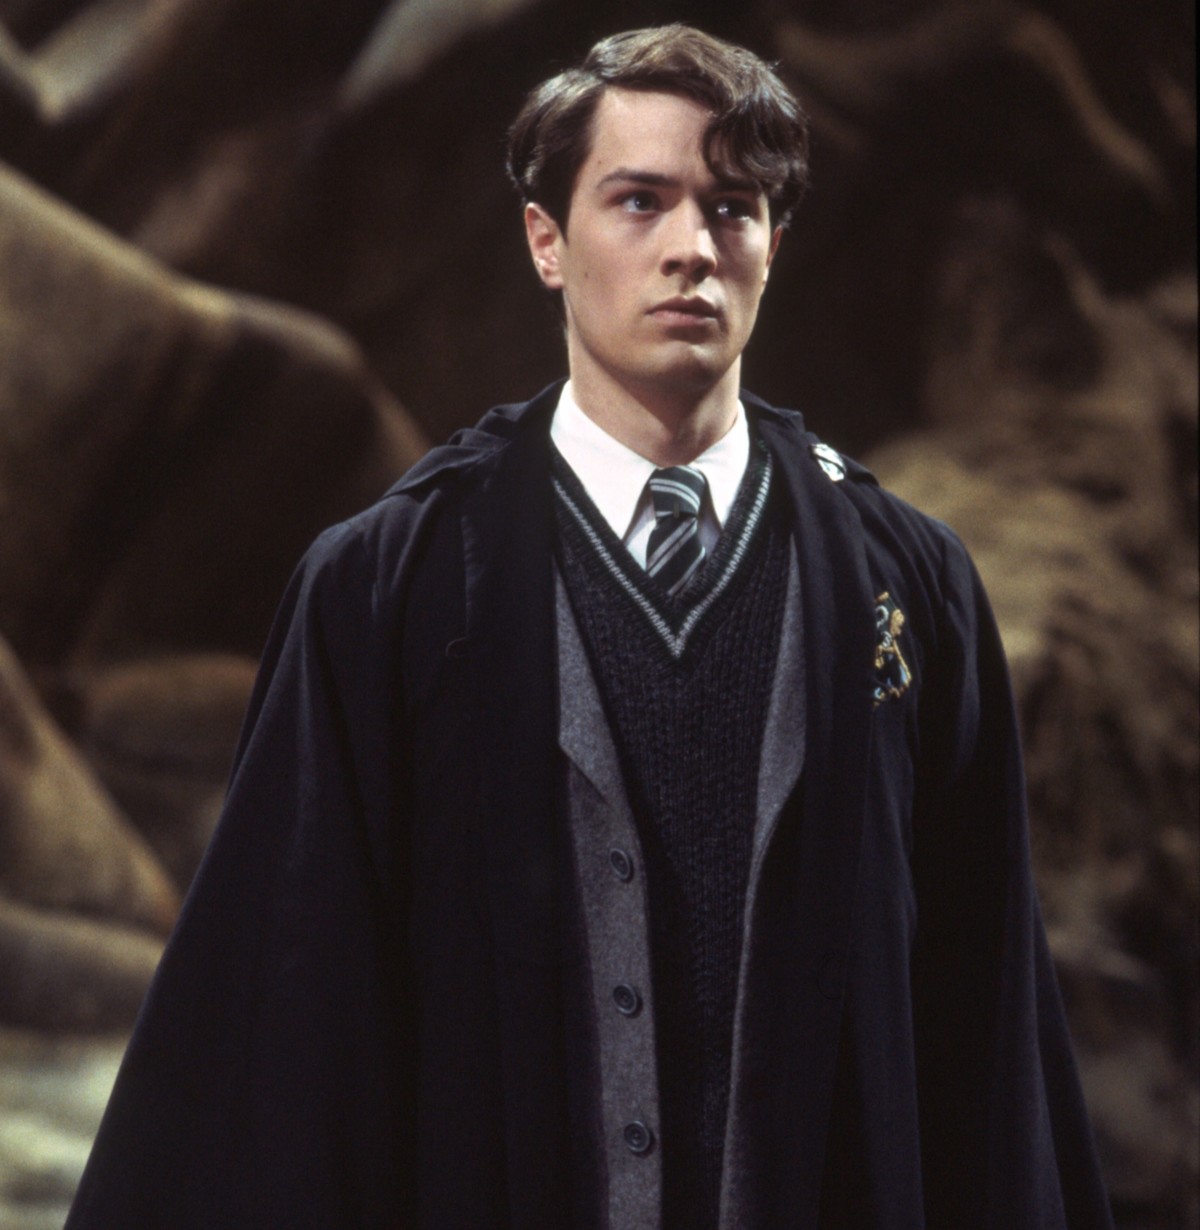 TomRiddle